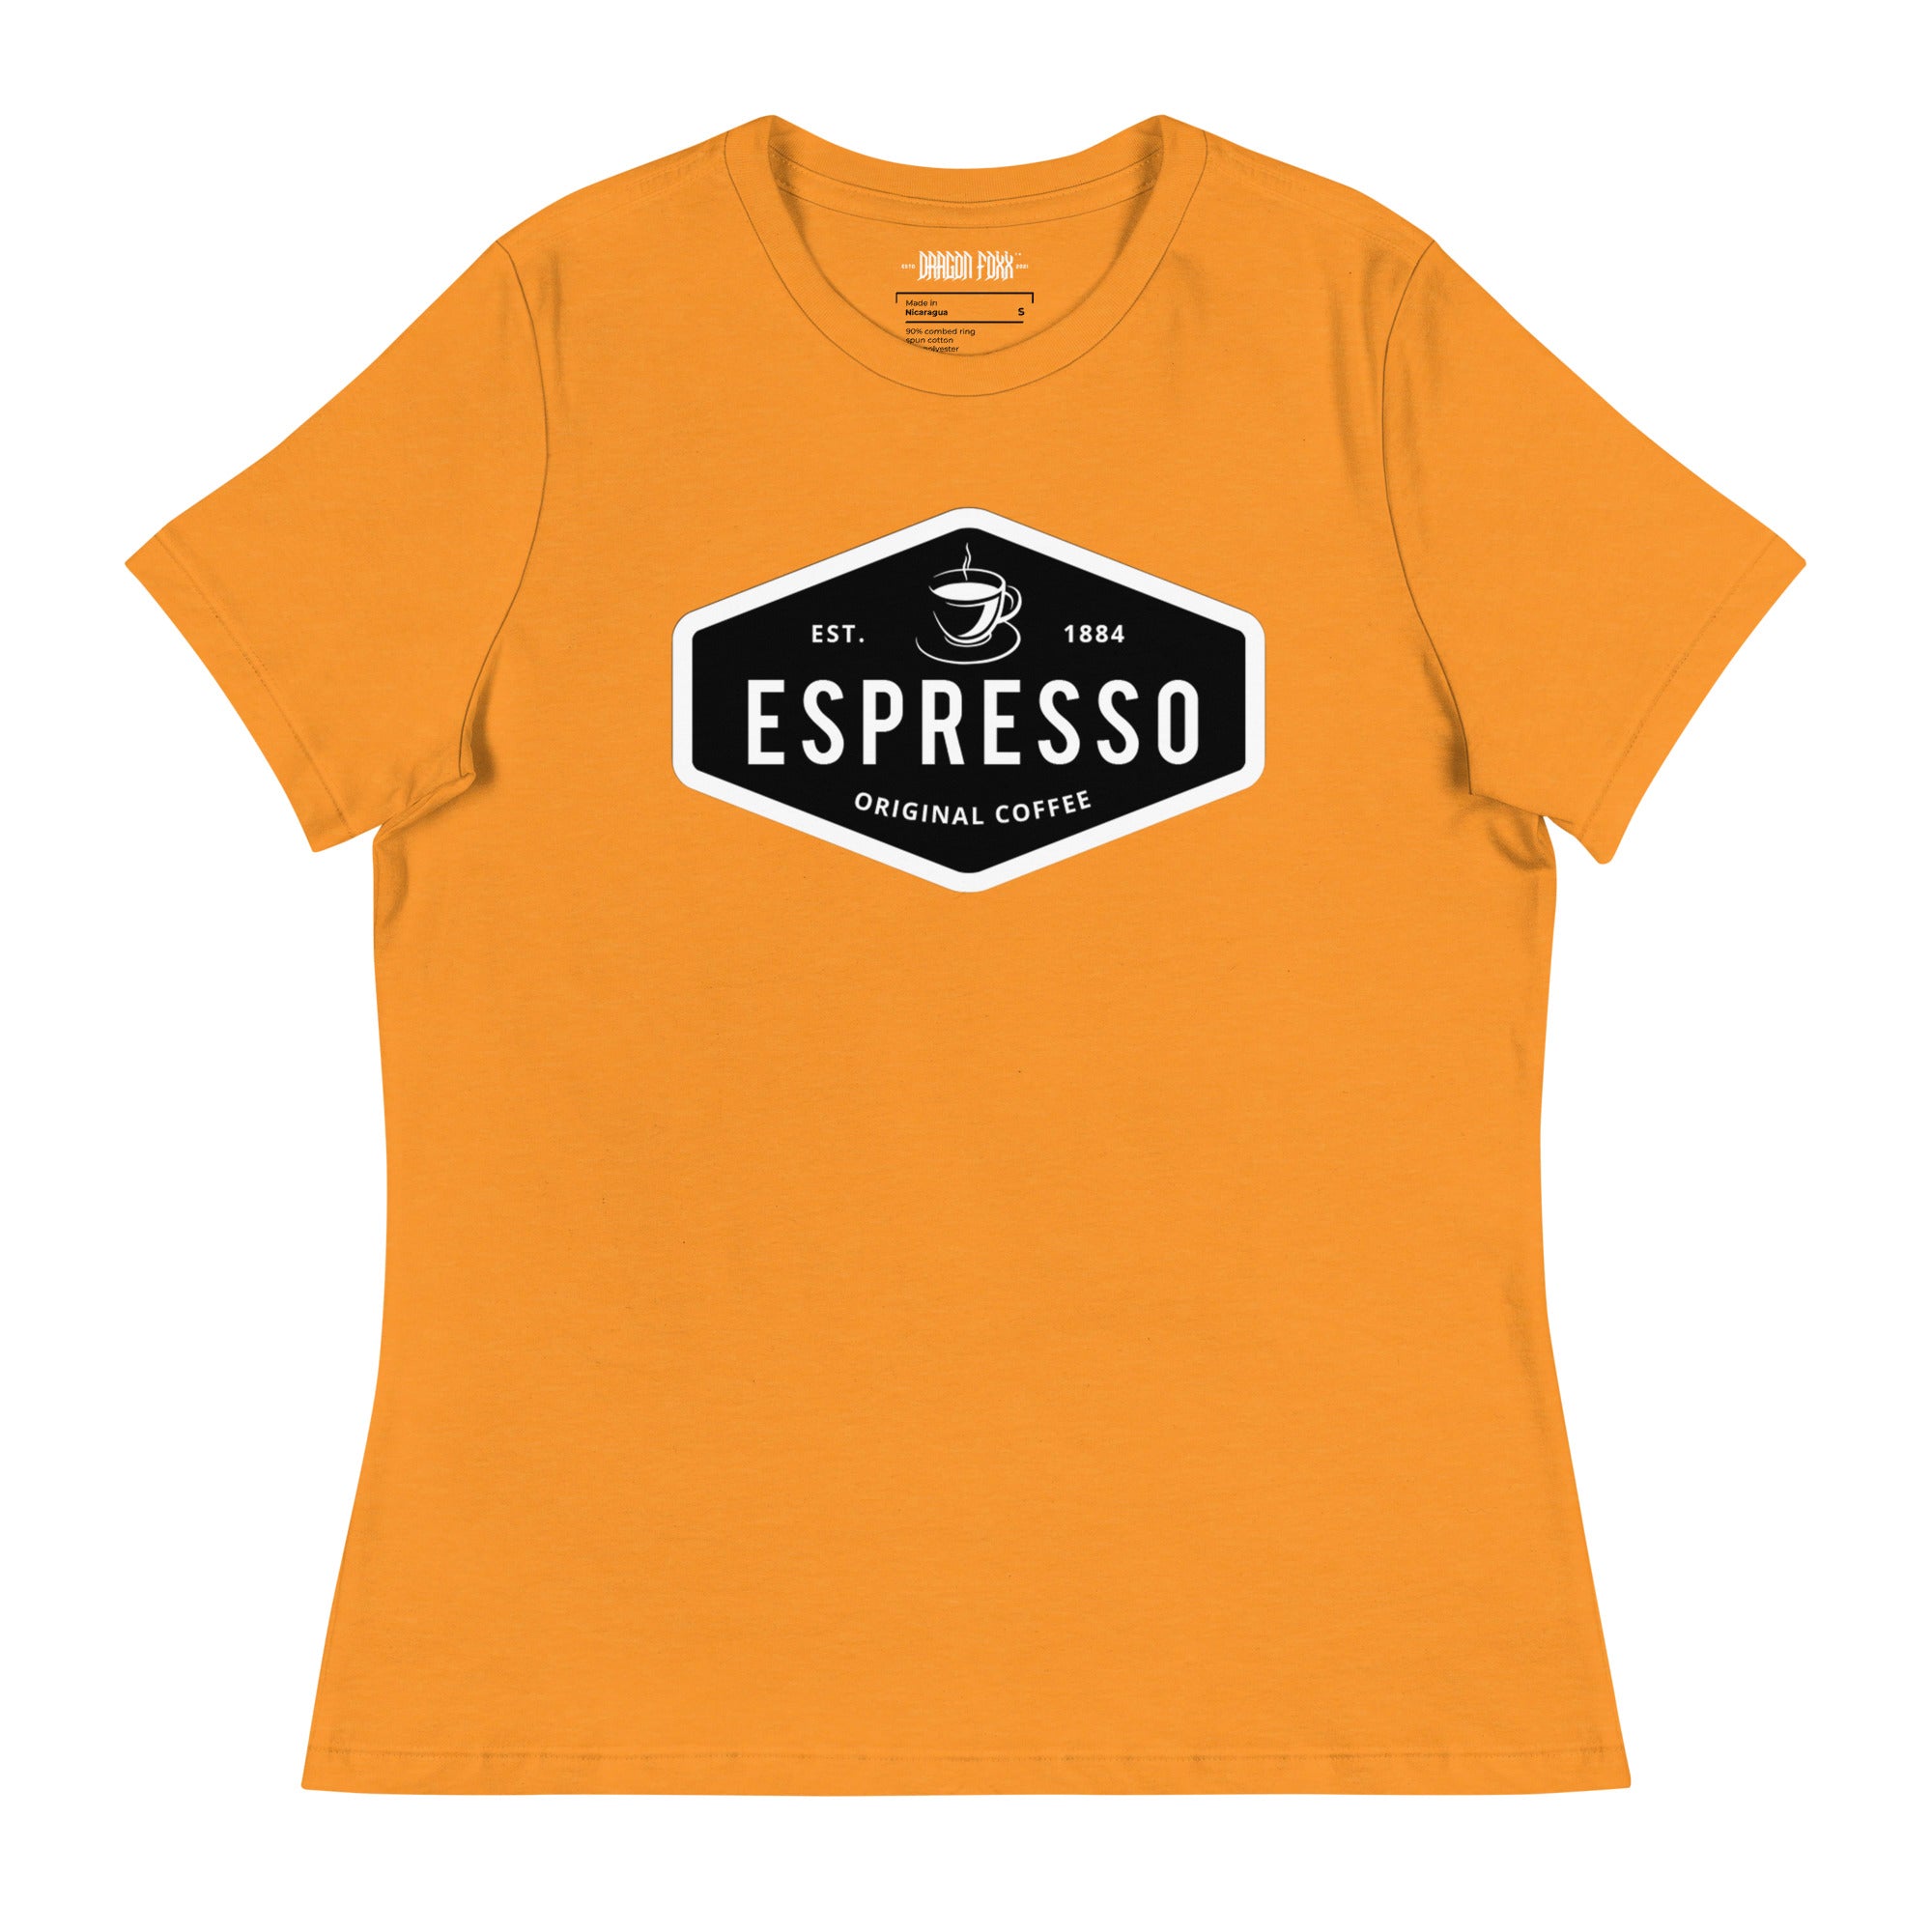 ESPRESSO - Women's Relaxed Fit Graphic T-Shirt in 16 Colors - Women's Relaxed Fit Graphic T-Shirt - DRAGON FOXX™ - 7218598_14263 - Heather Marmalade - S - Athletic Heather T-shirt - Berry T-shirt - Black T-shirt